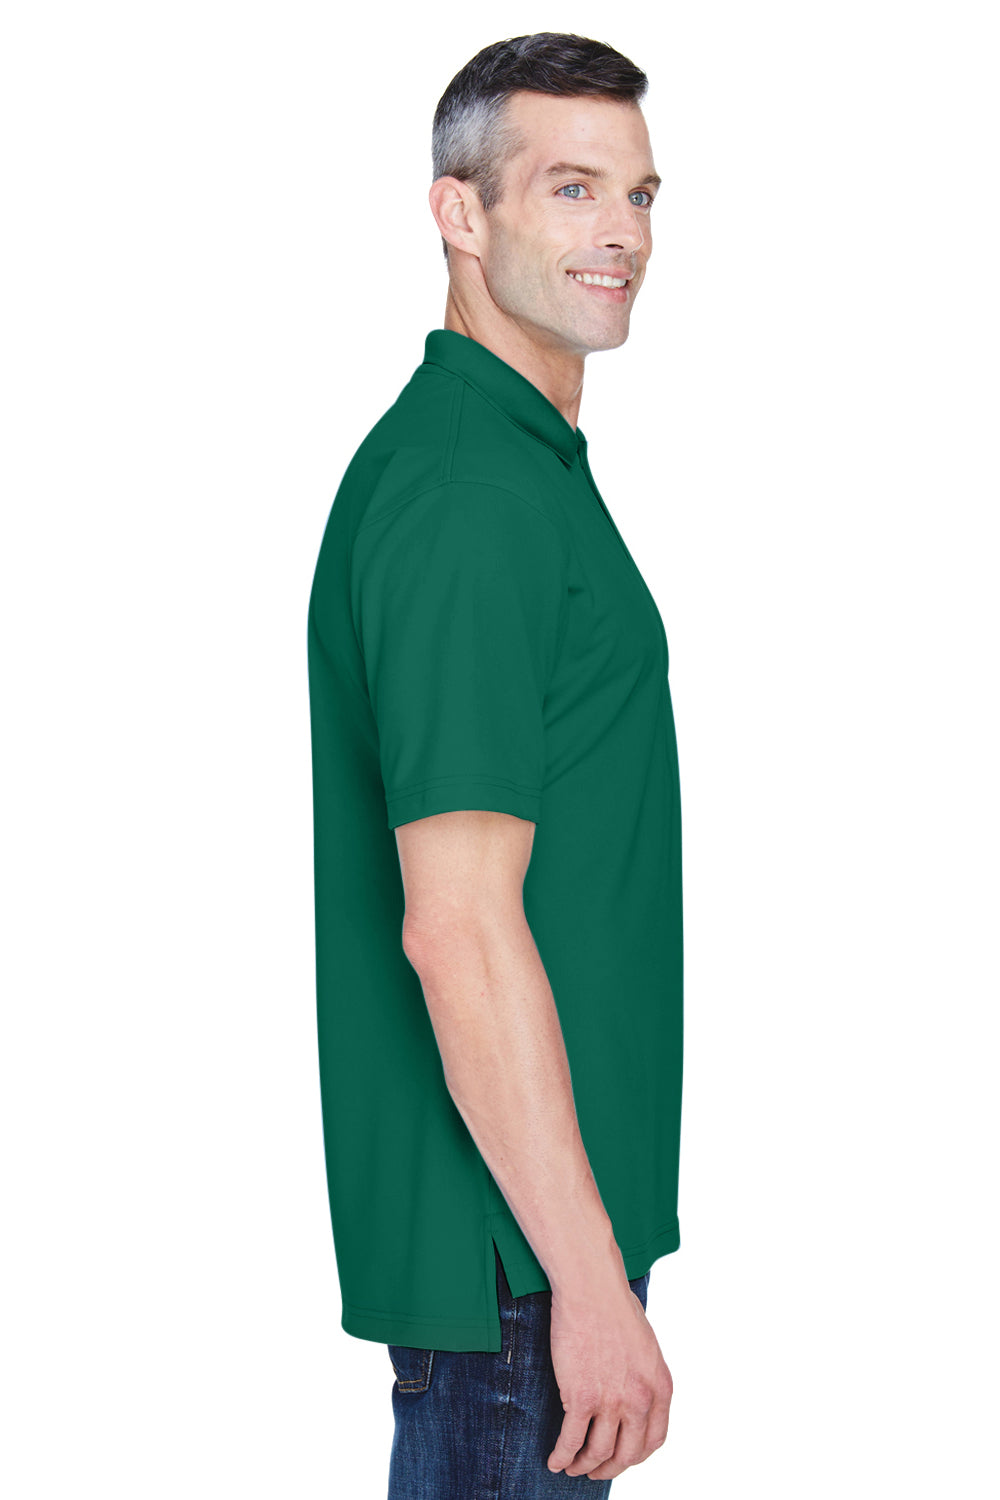 UltraClub 8445 Mens Cool & Dry Performance Moisture Wicking Short Sleeve Polo Shirt Forest Green Side